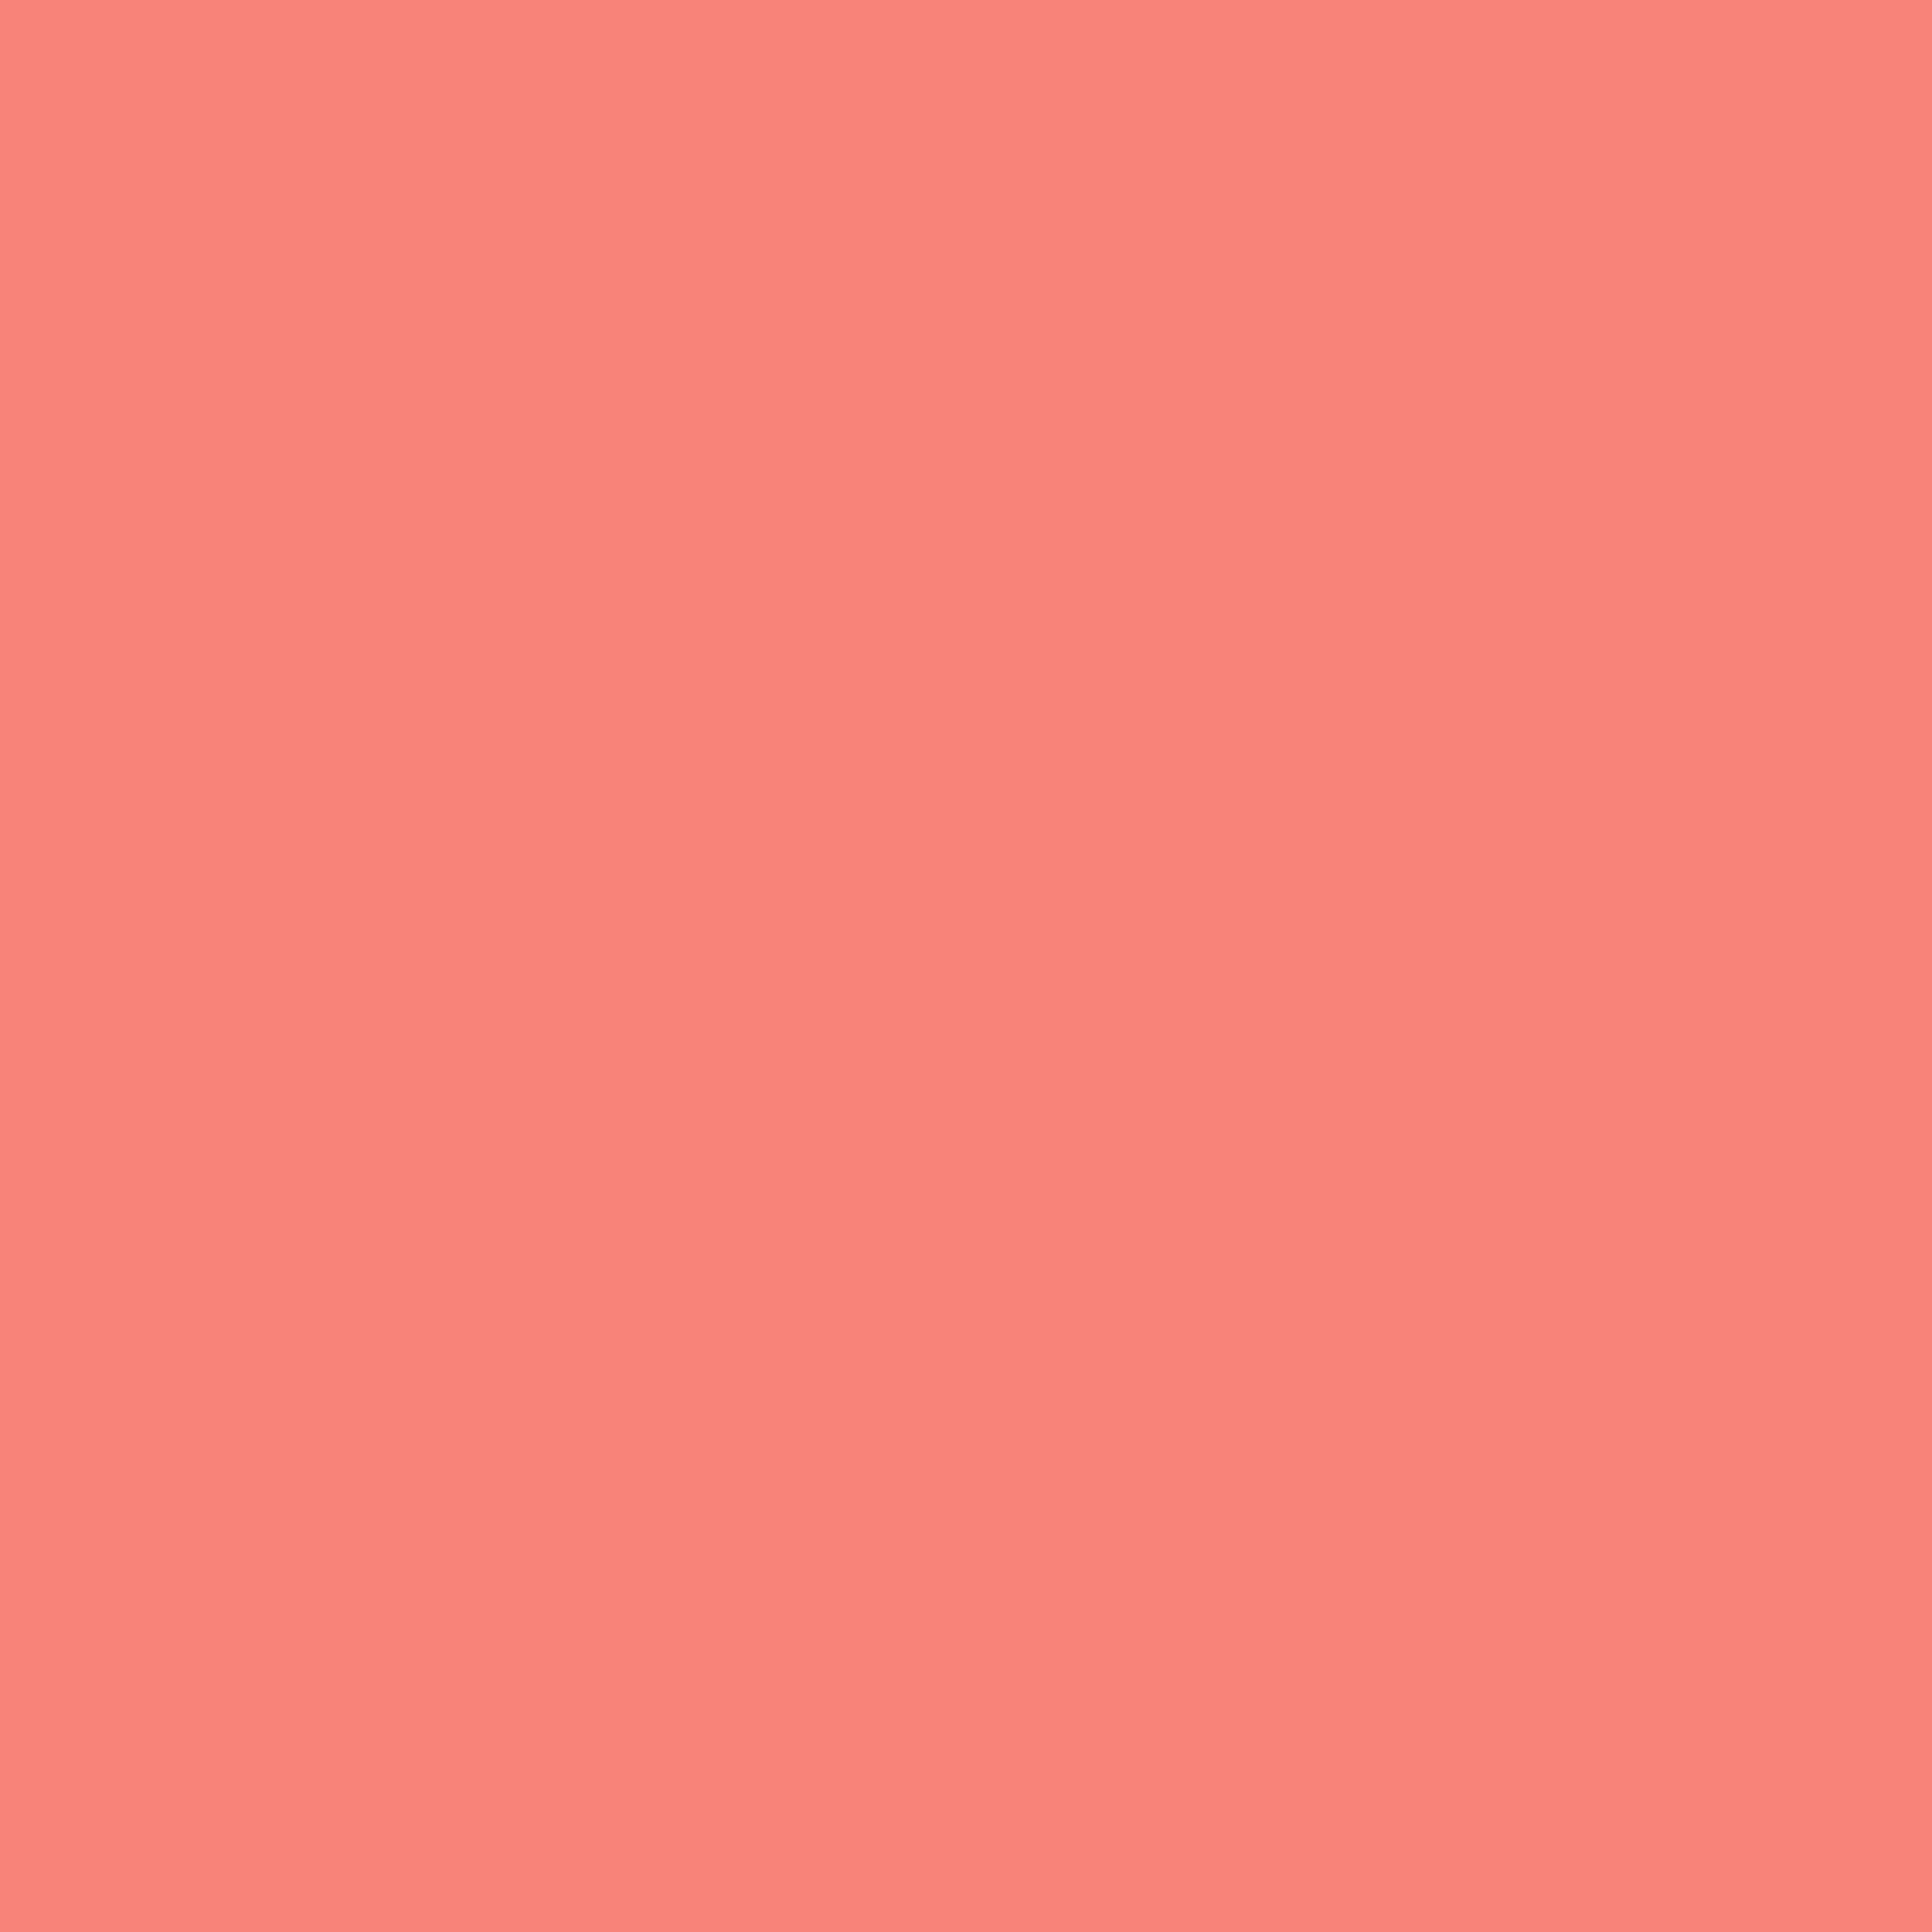 2048x2048 Coral Pink Solid Color Background